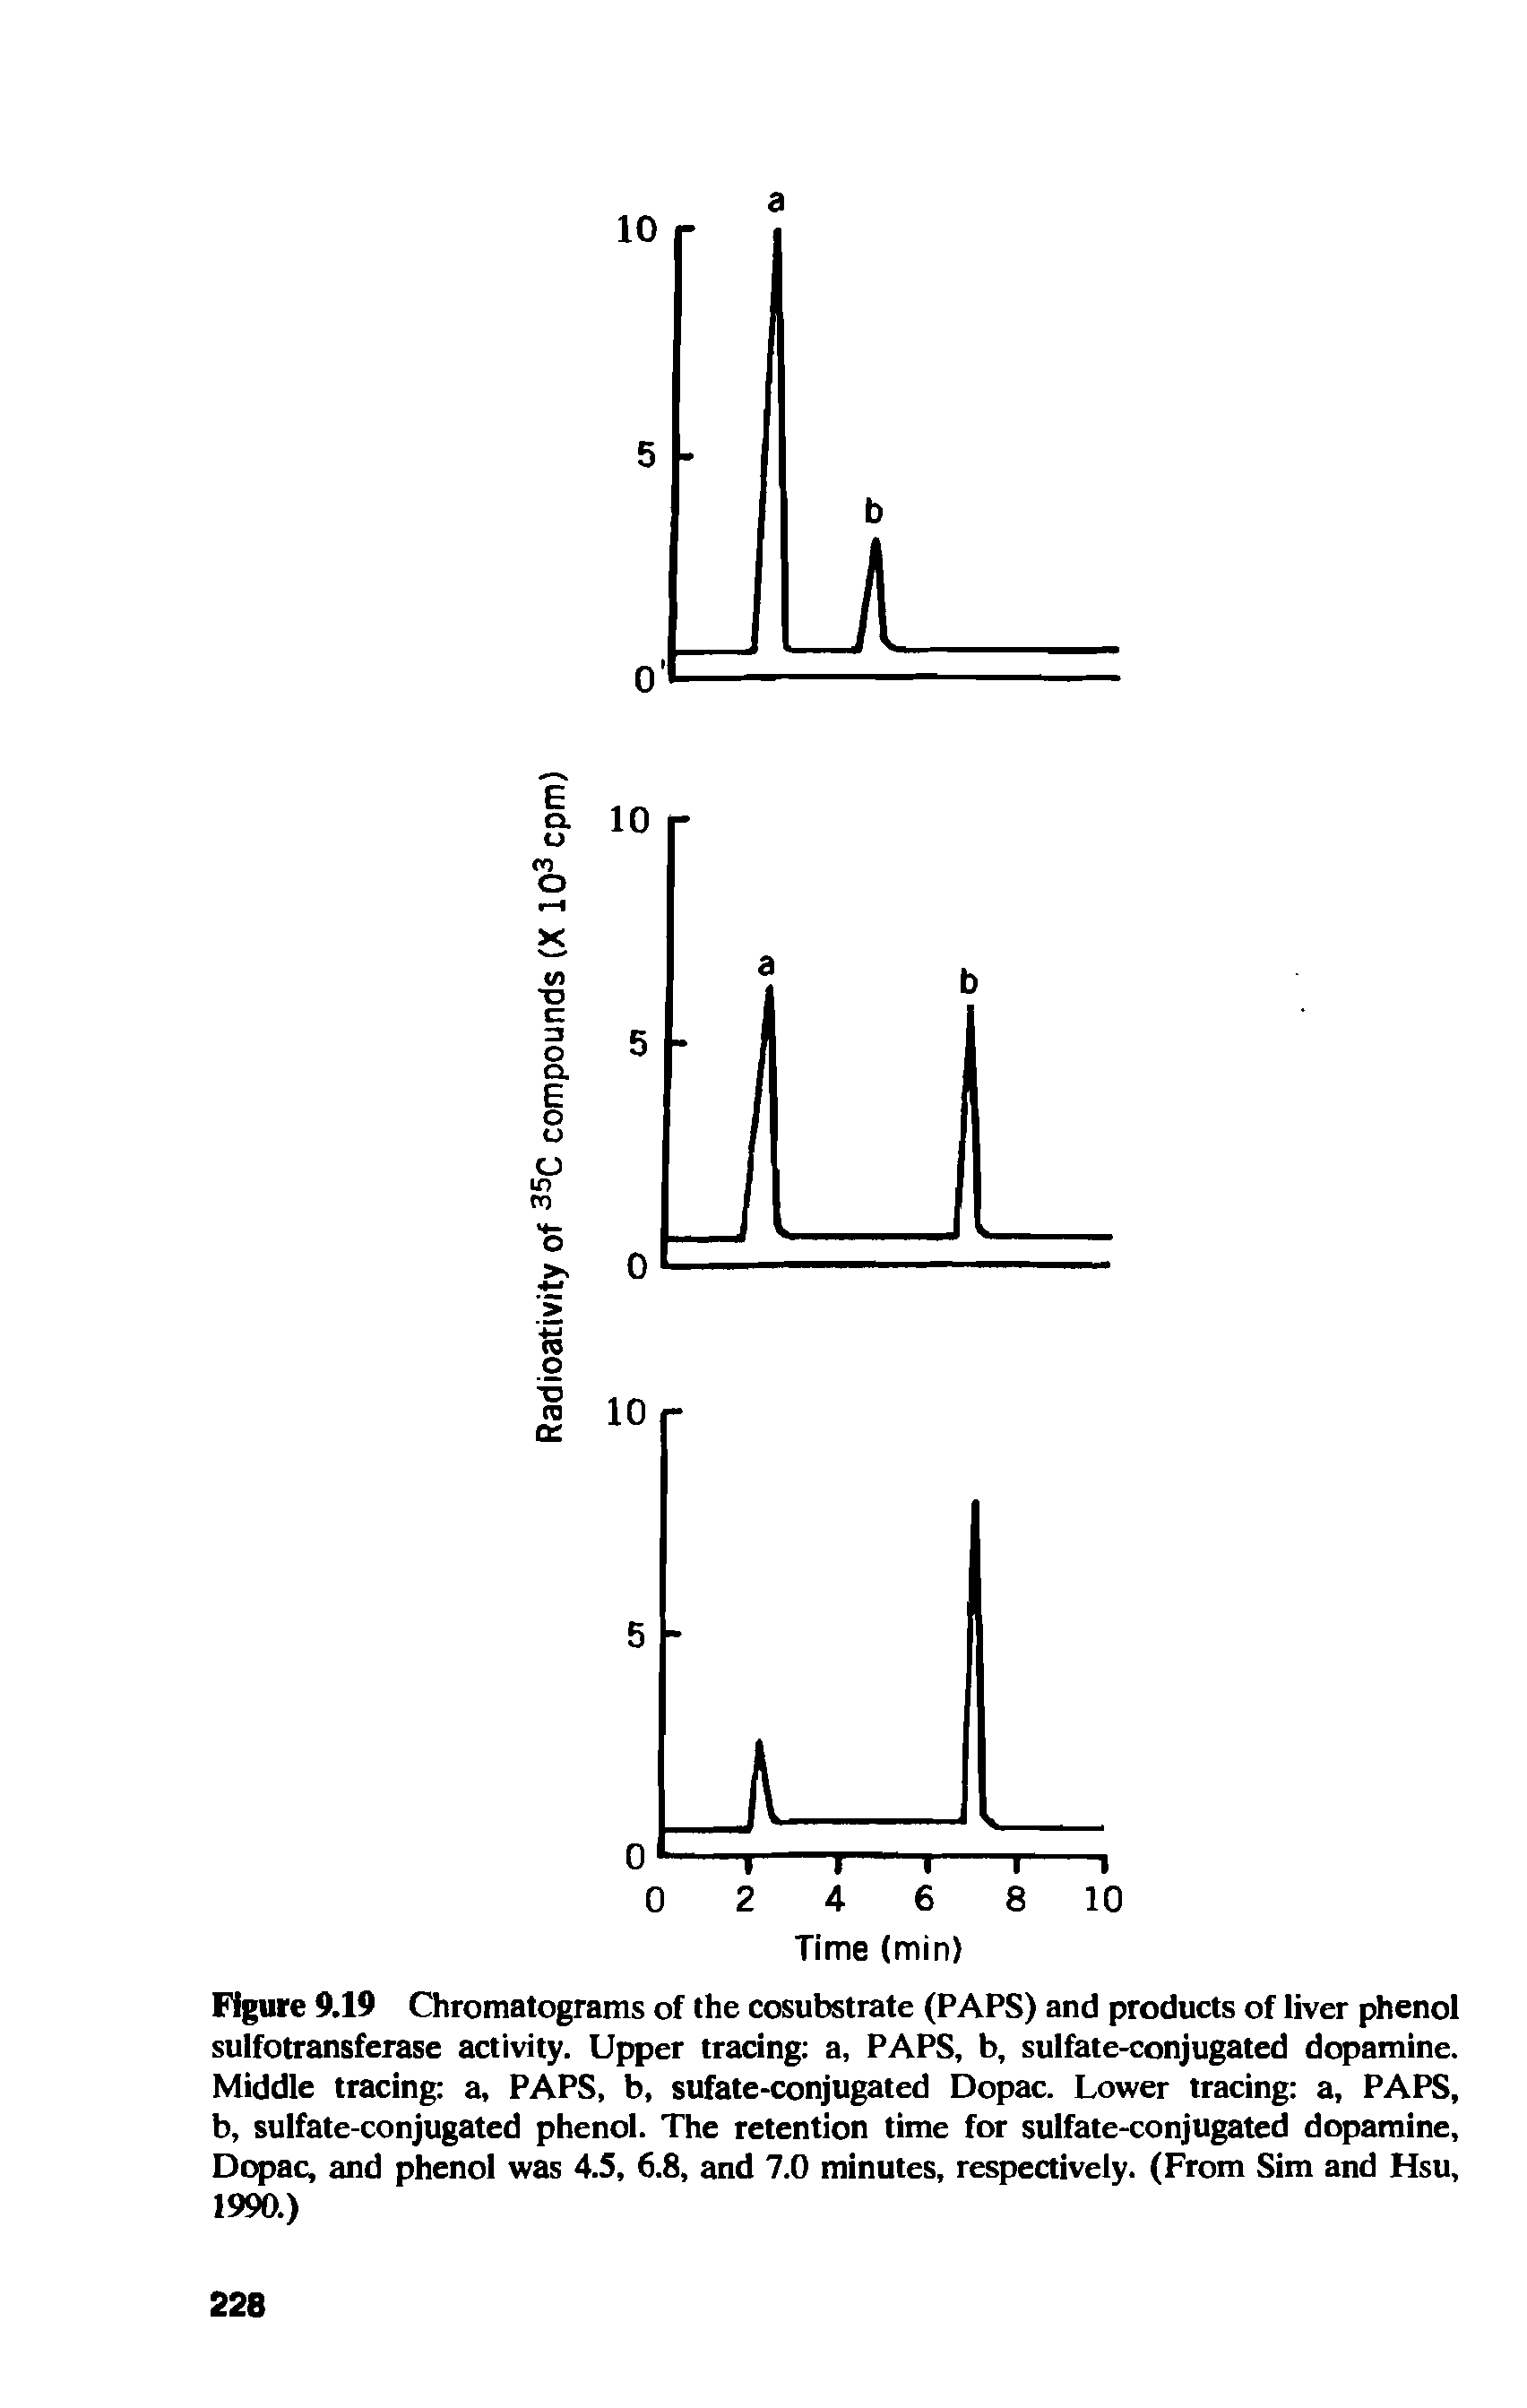 Figure 9,19 Chromatograms of the cosubstrate (PAPS) and products of liver phenol sulfotransferase activity. Upper tracing a, PAPS, b, sulfate-conjugated dopamine. Middle tracing a, PAPS, b, sufate-conjugated Dopac. Lower tracing a, PAPS, b, sulfate-conjugated phenol. The retention time for sulfate-conjugated dopamine, Dopac, and phenol was 4.5, 6.8, and 7.0 minutes, respectively. (From Sim and Hsu, 1990.)...